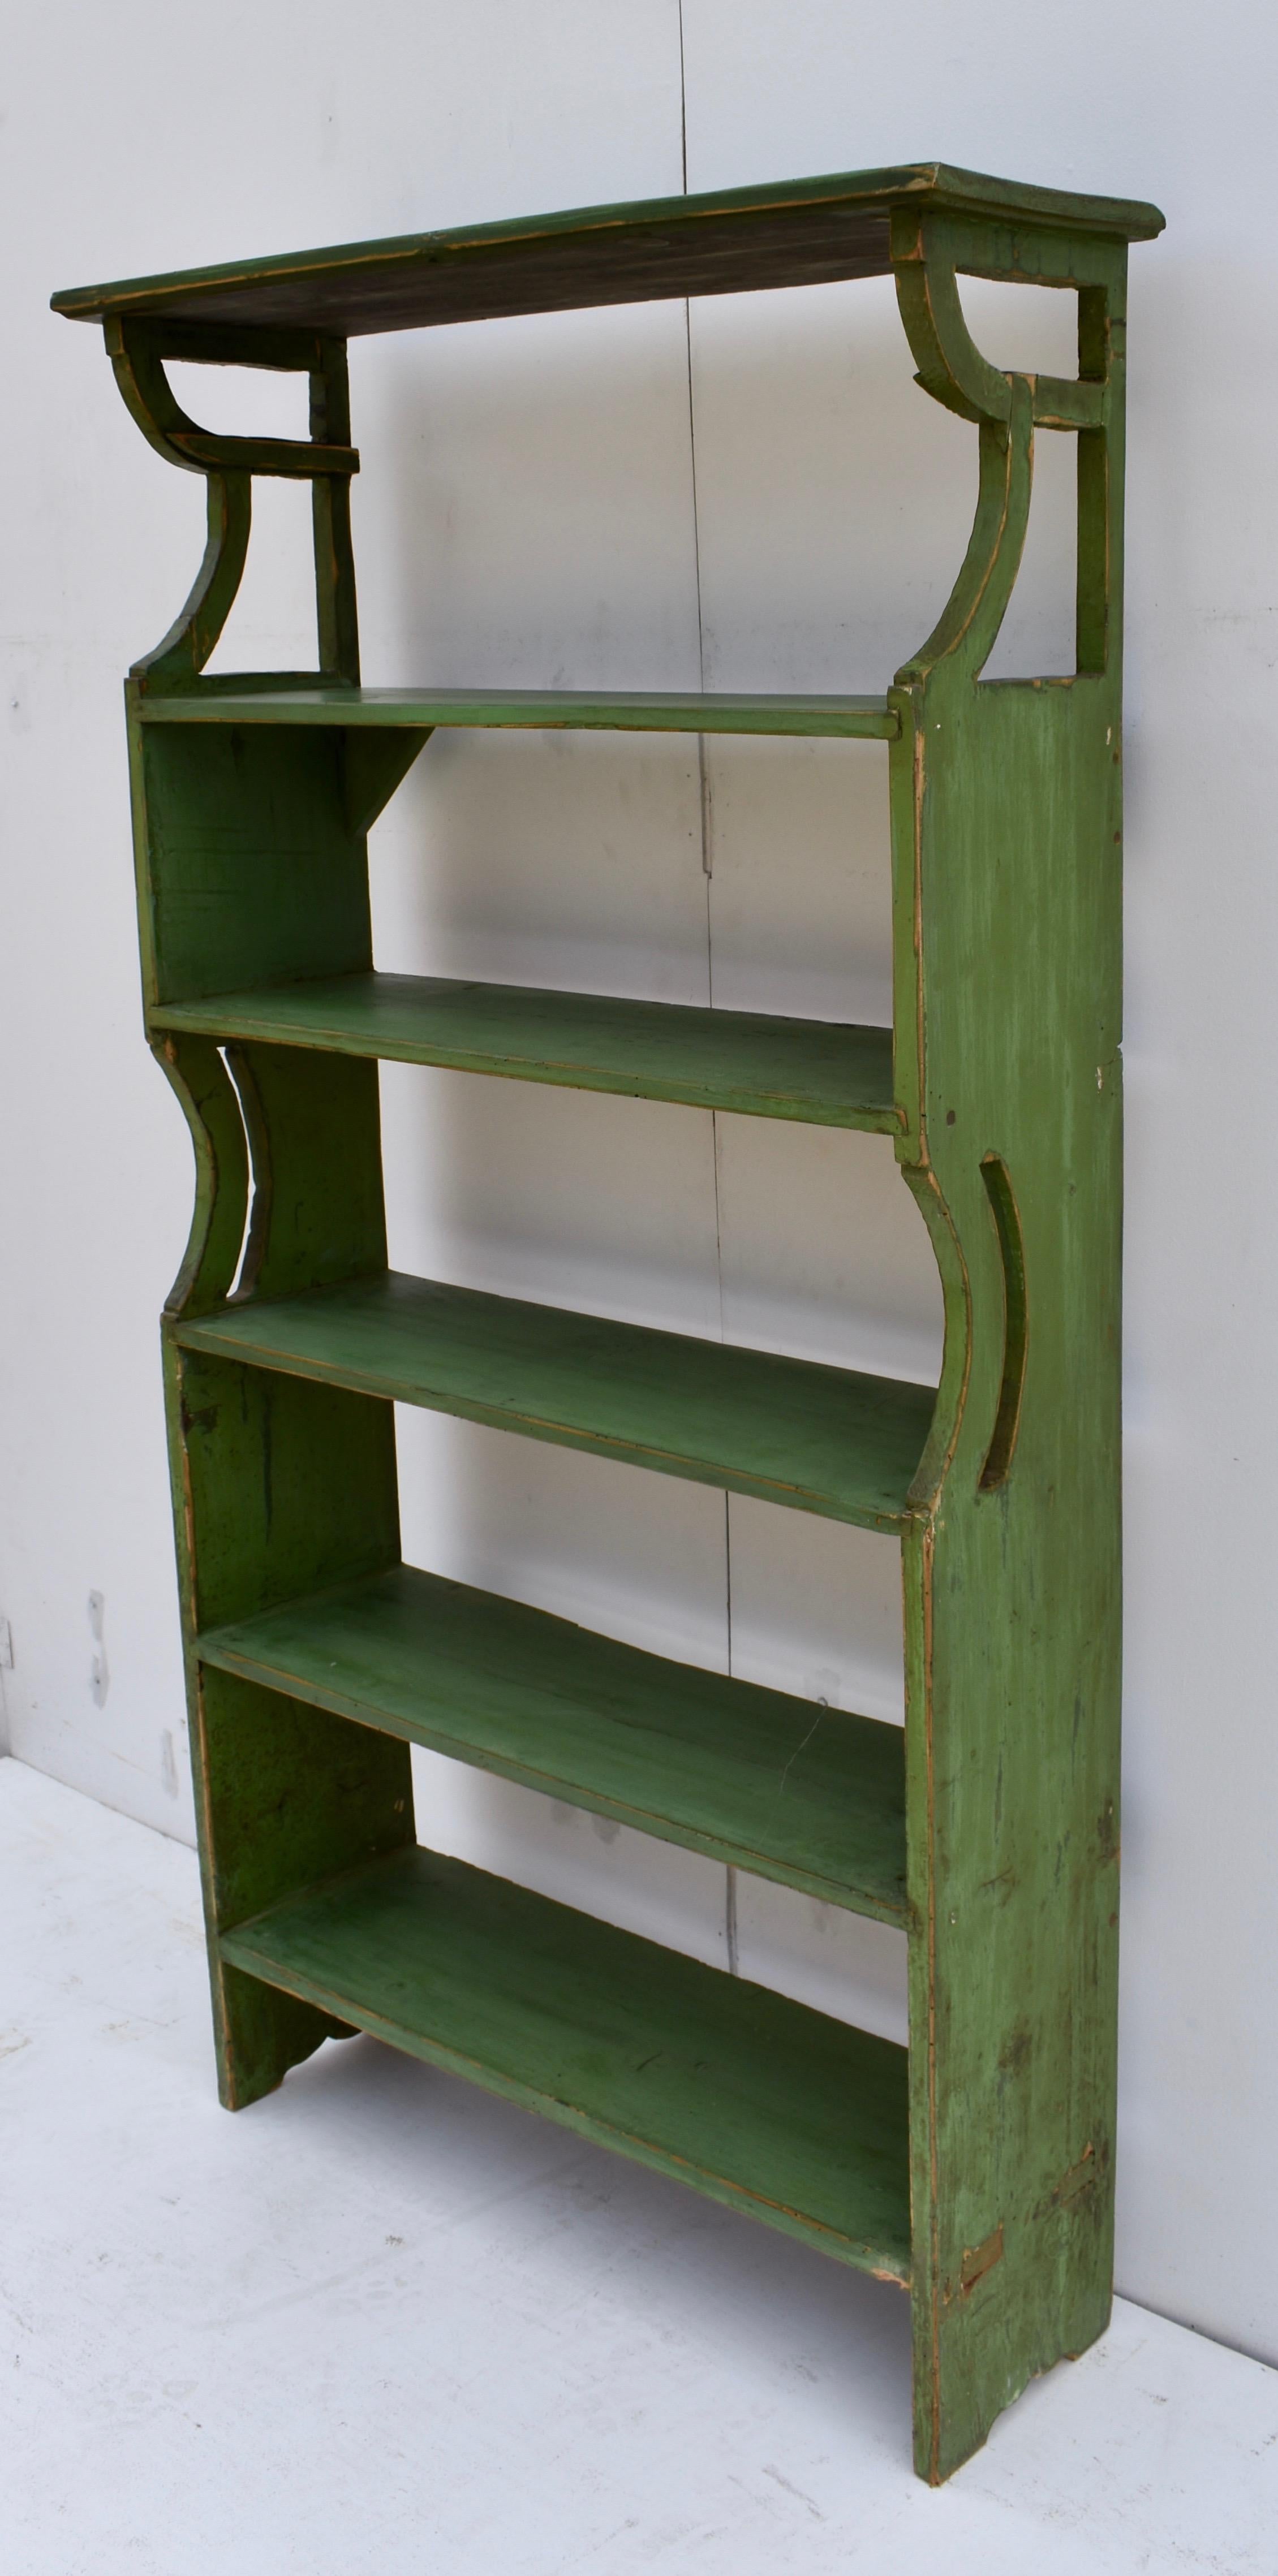 Country Painted Pine Bookshelves or Etagere